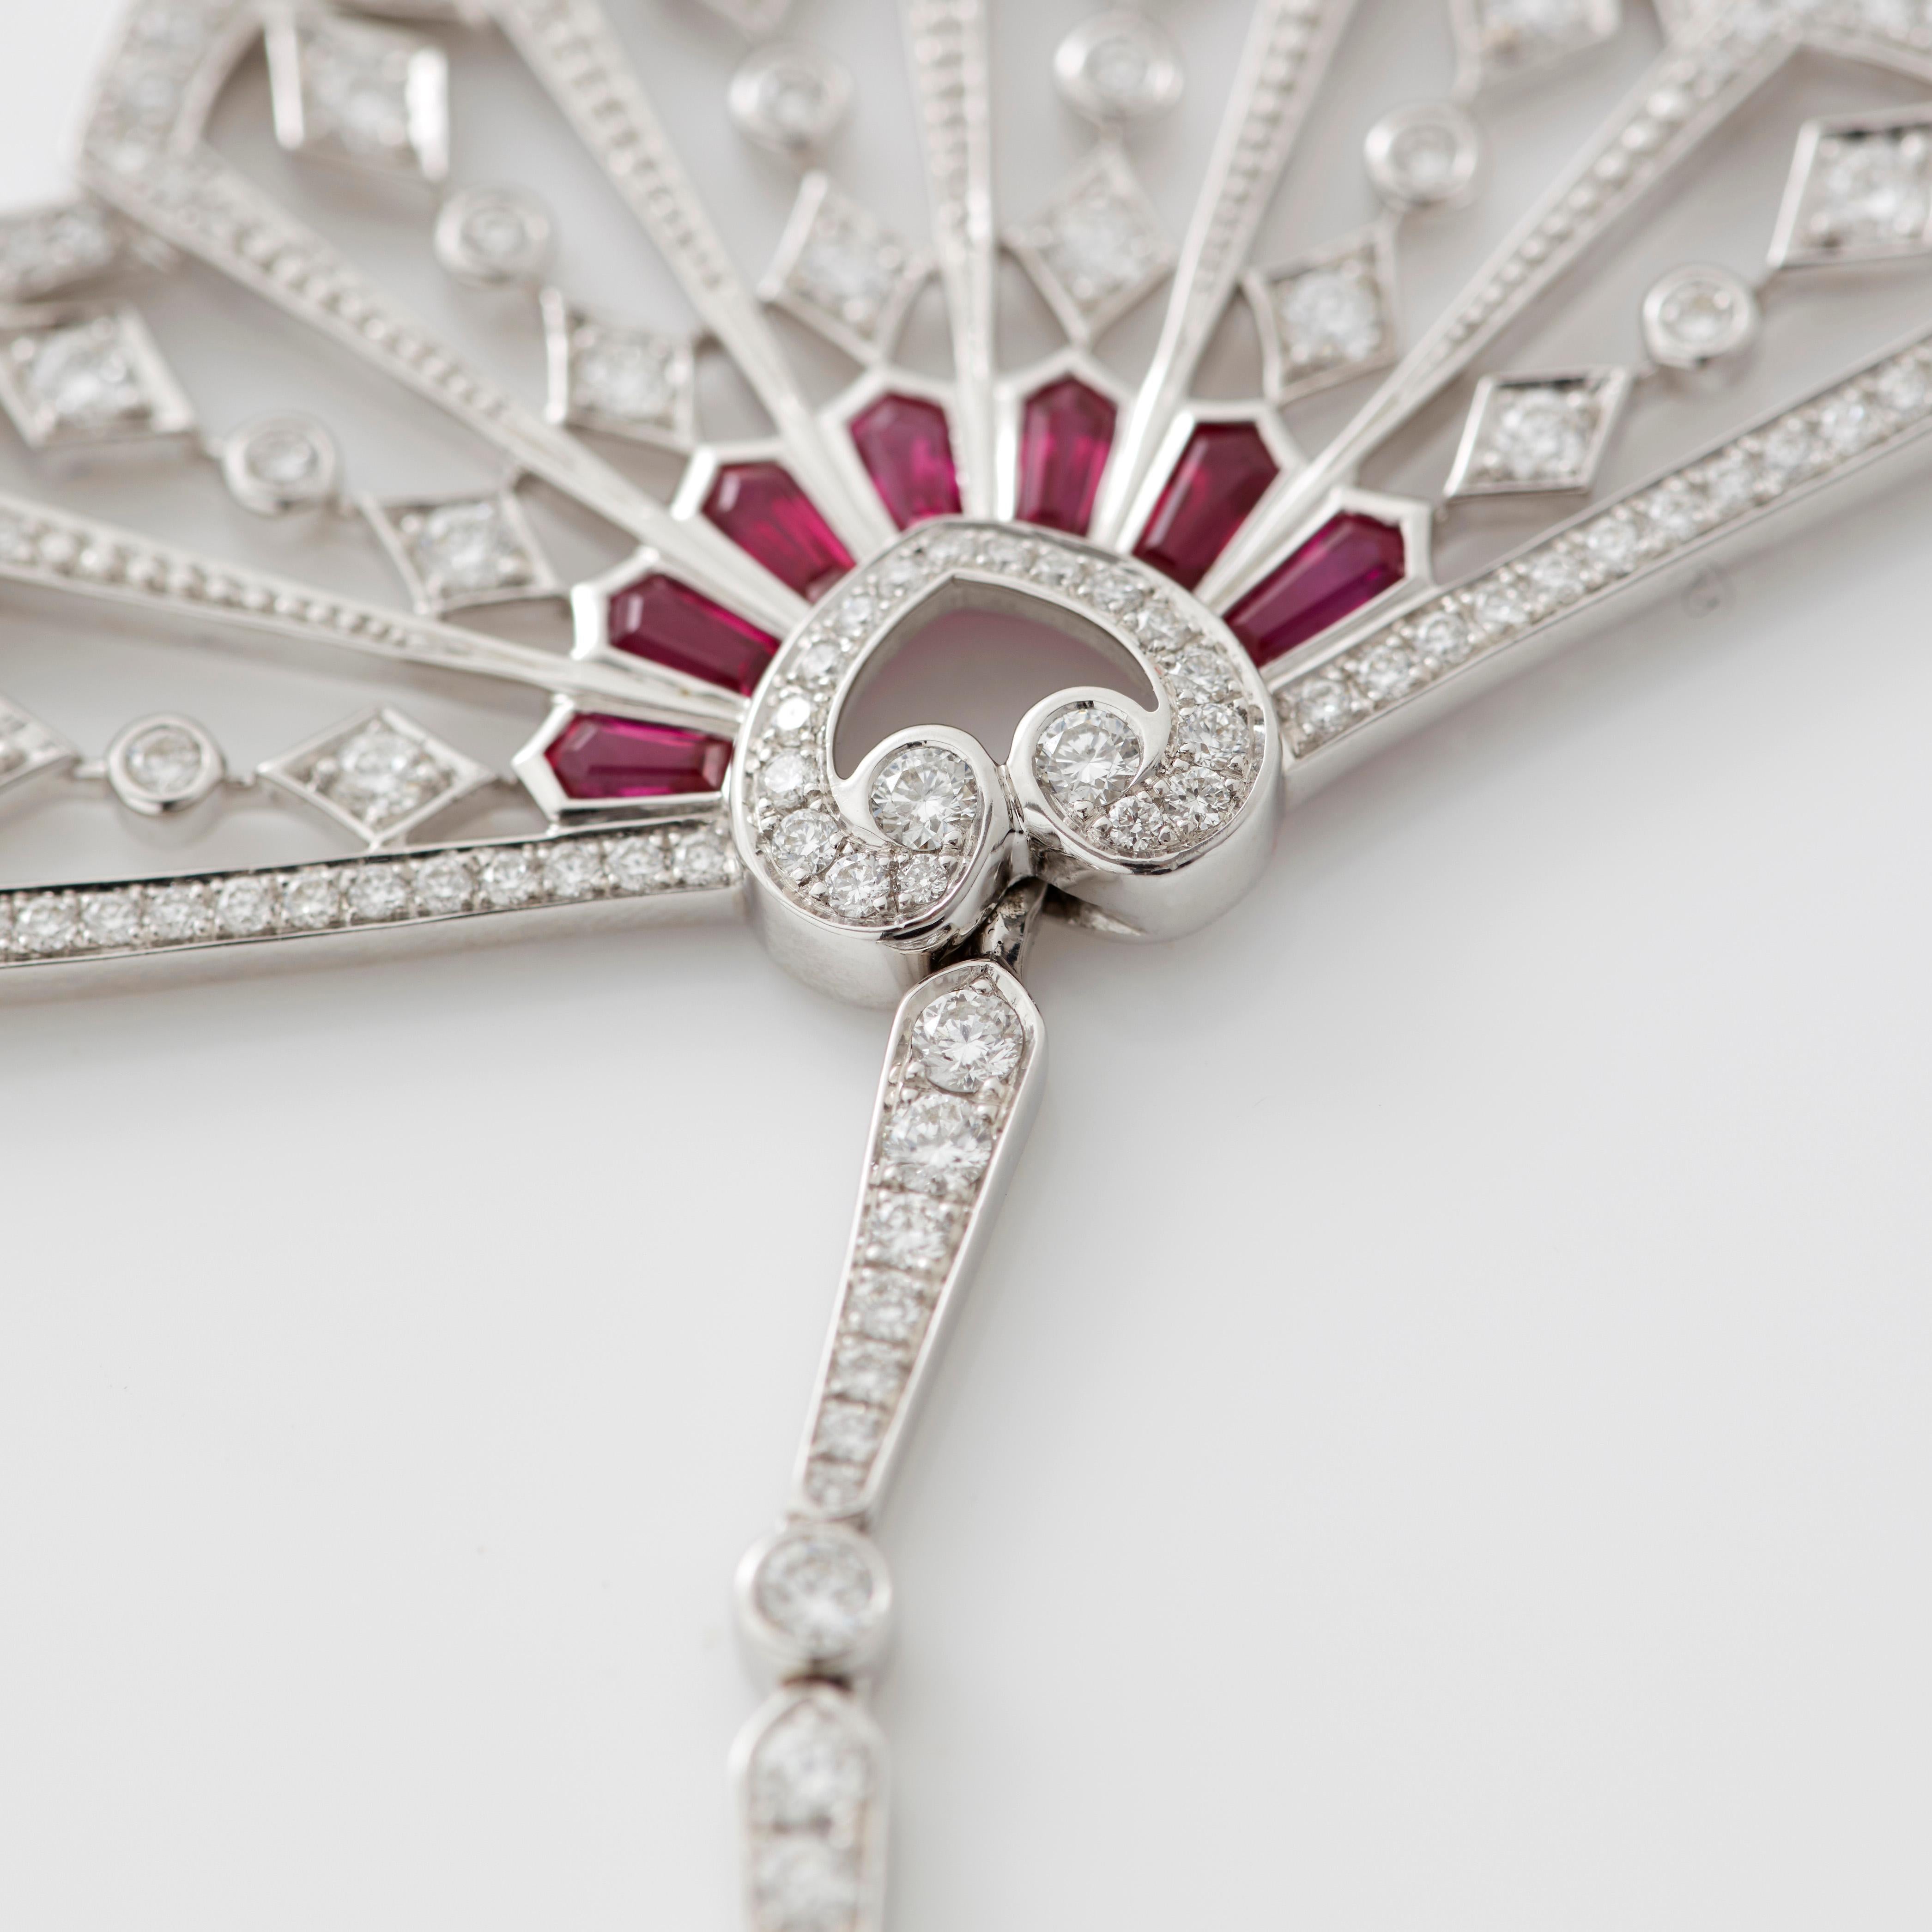 Garrard 'Fanfare' White Gold Pendant with White Diamond and Calibre Cut Rubies For Sale 1